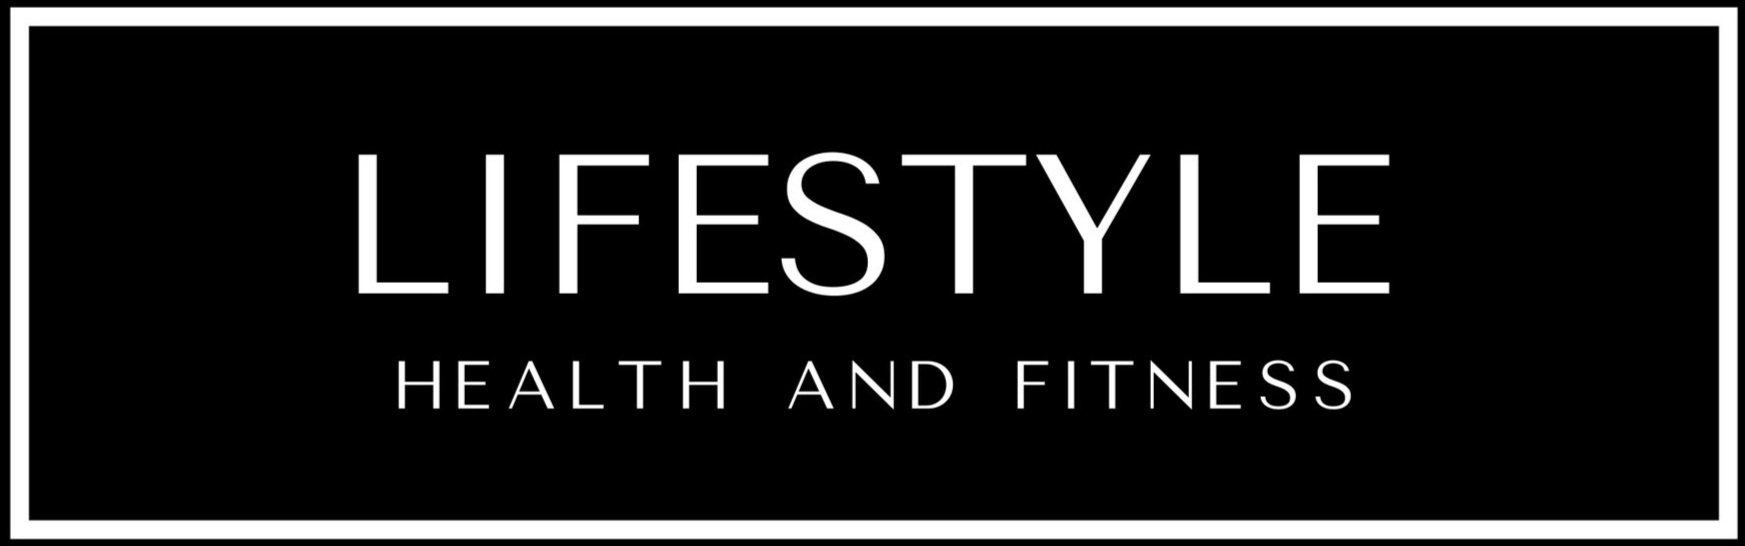 Lifestyle Health and Fitness